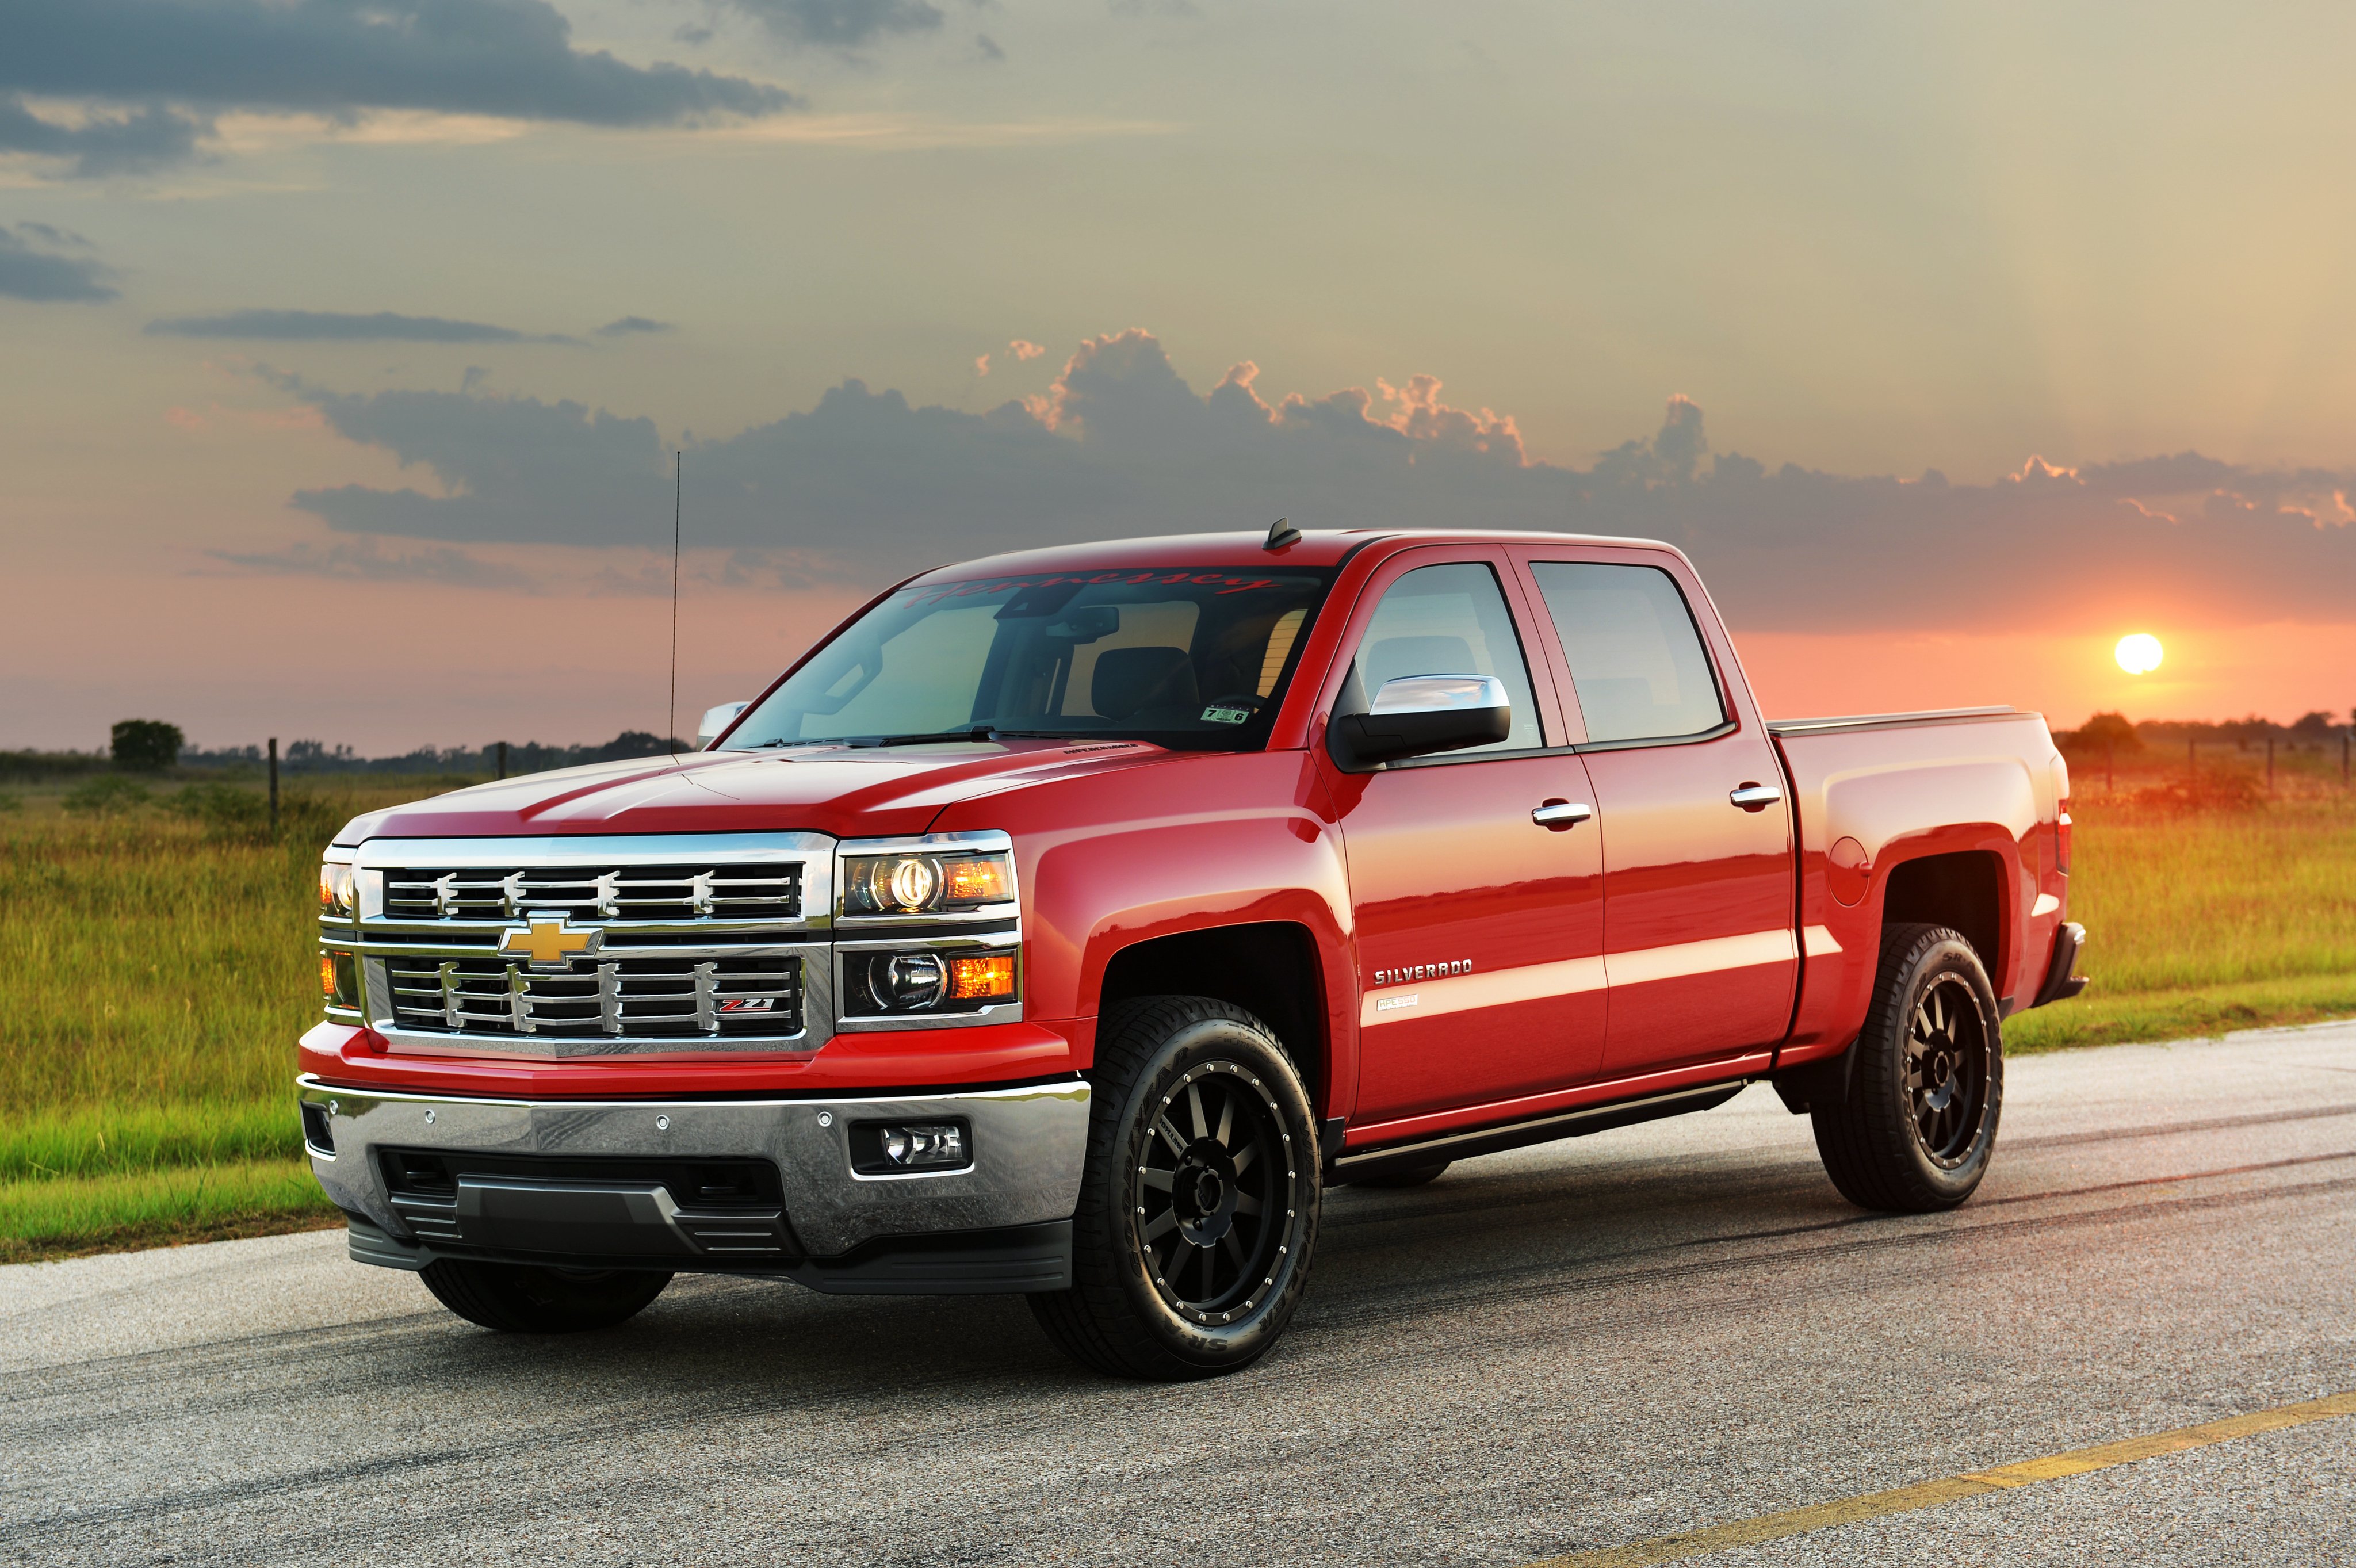 2015, Hennessey, Chevrolet, Silverado, Z71, Hpe550, Pickup, Muscle, Tuning Wallpaper